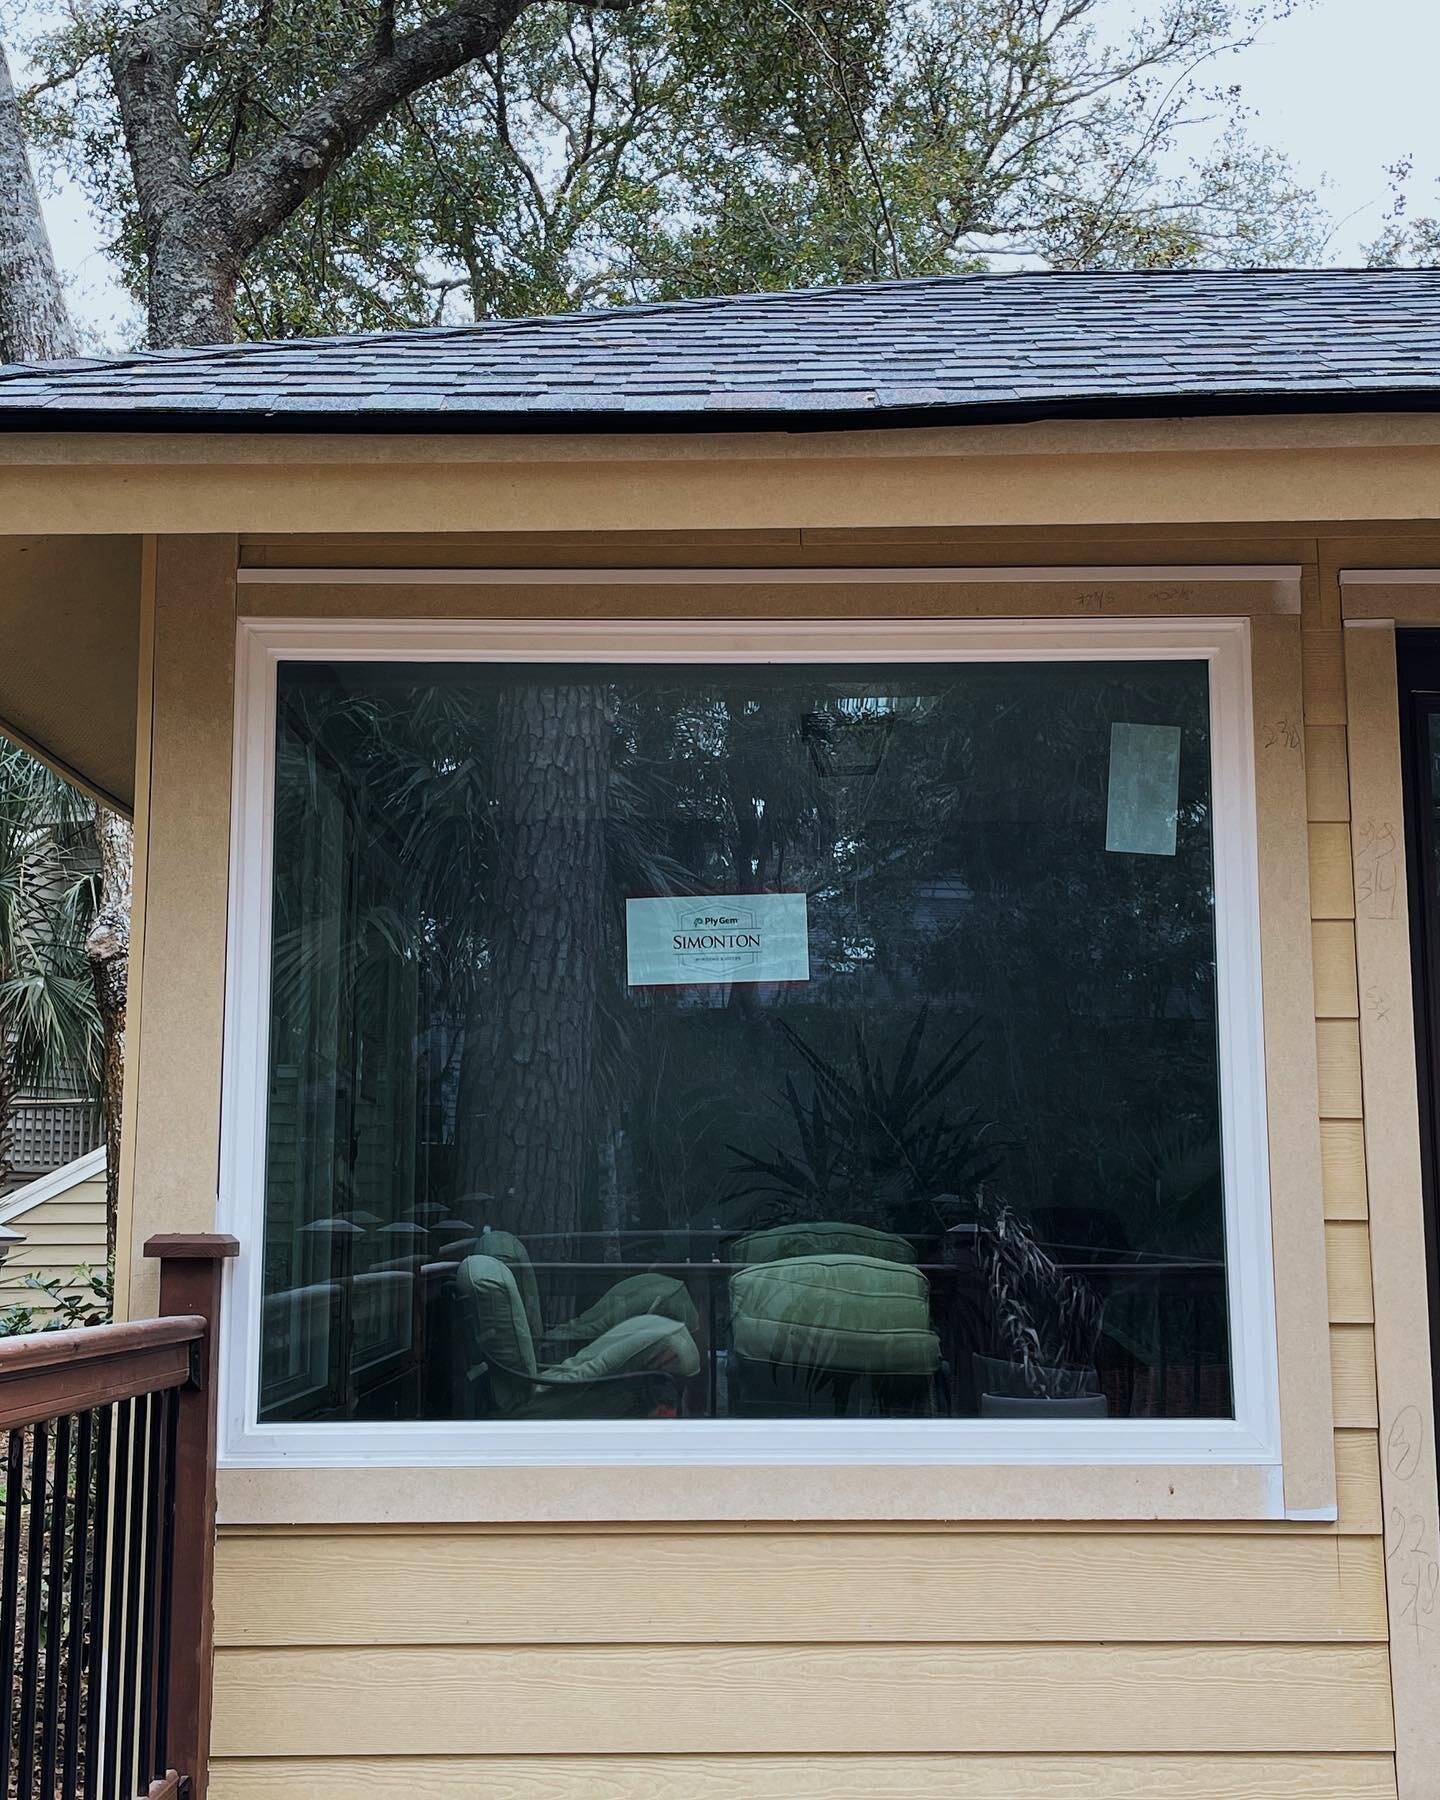 With hurricane season right around the corner, are your home&rsquo;s windows hurricane ready?

We recommend installing Simonton Stormbreaker Plus impact rated windows! Simonton&rsquo;s line of Stormbreaker Plus windows are made especially for coastal